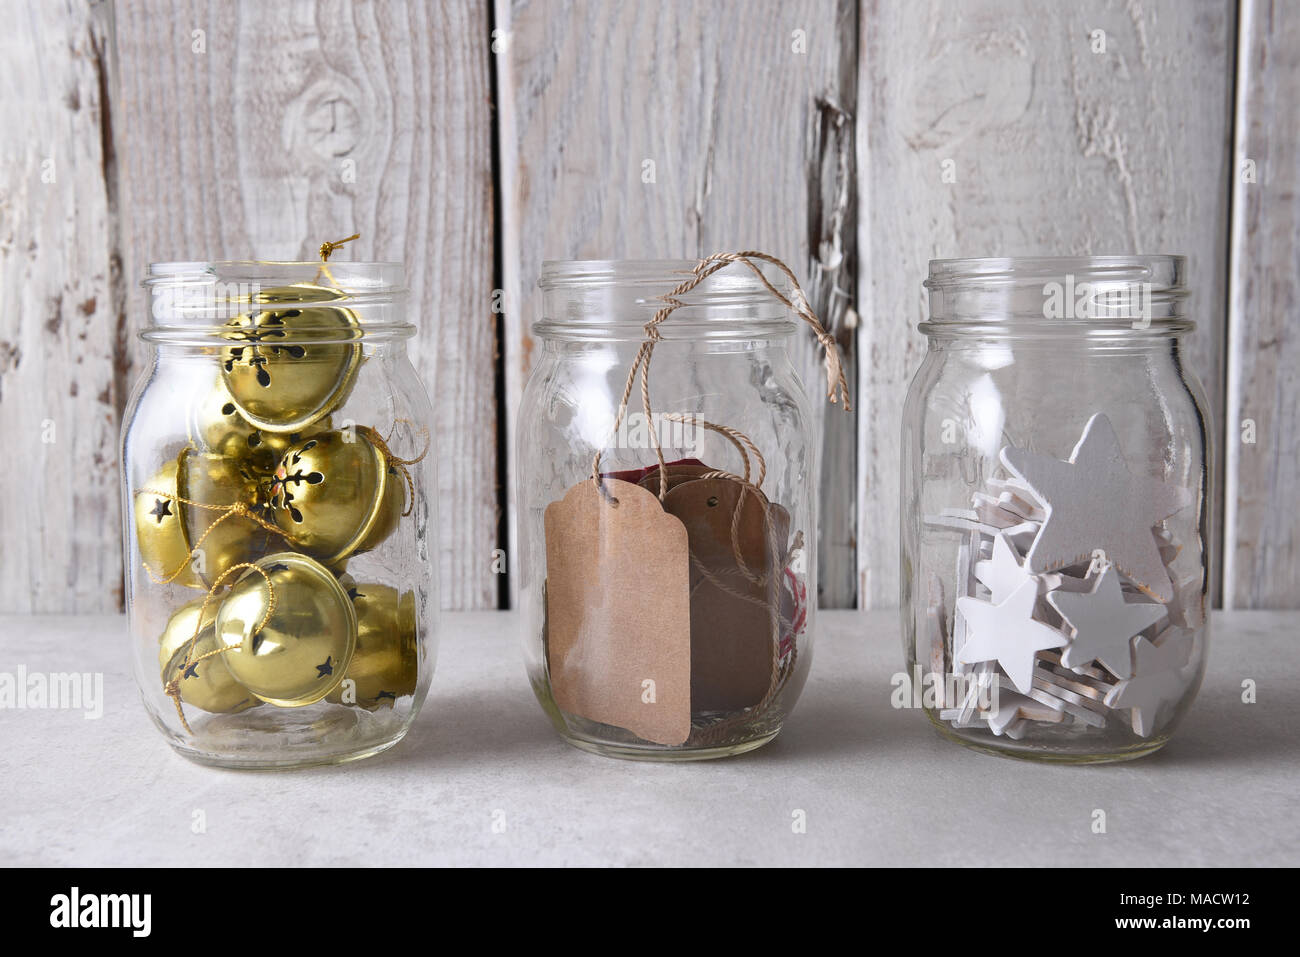 Christmas present wrapping supplies. Three mason jars with gift tags, wood stars, and sleigh bells against a rustic white wood wall. Stock Photo